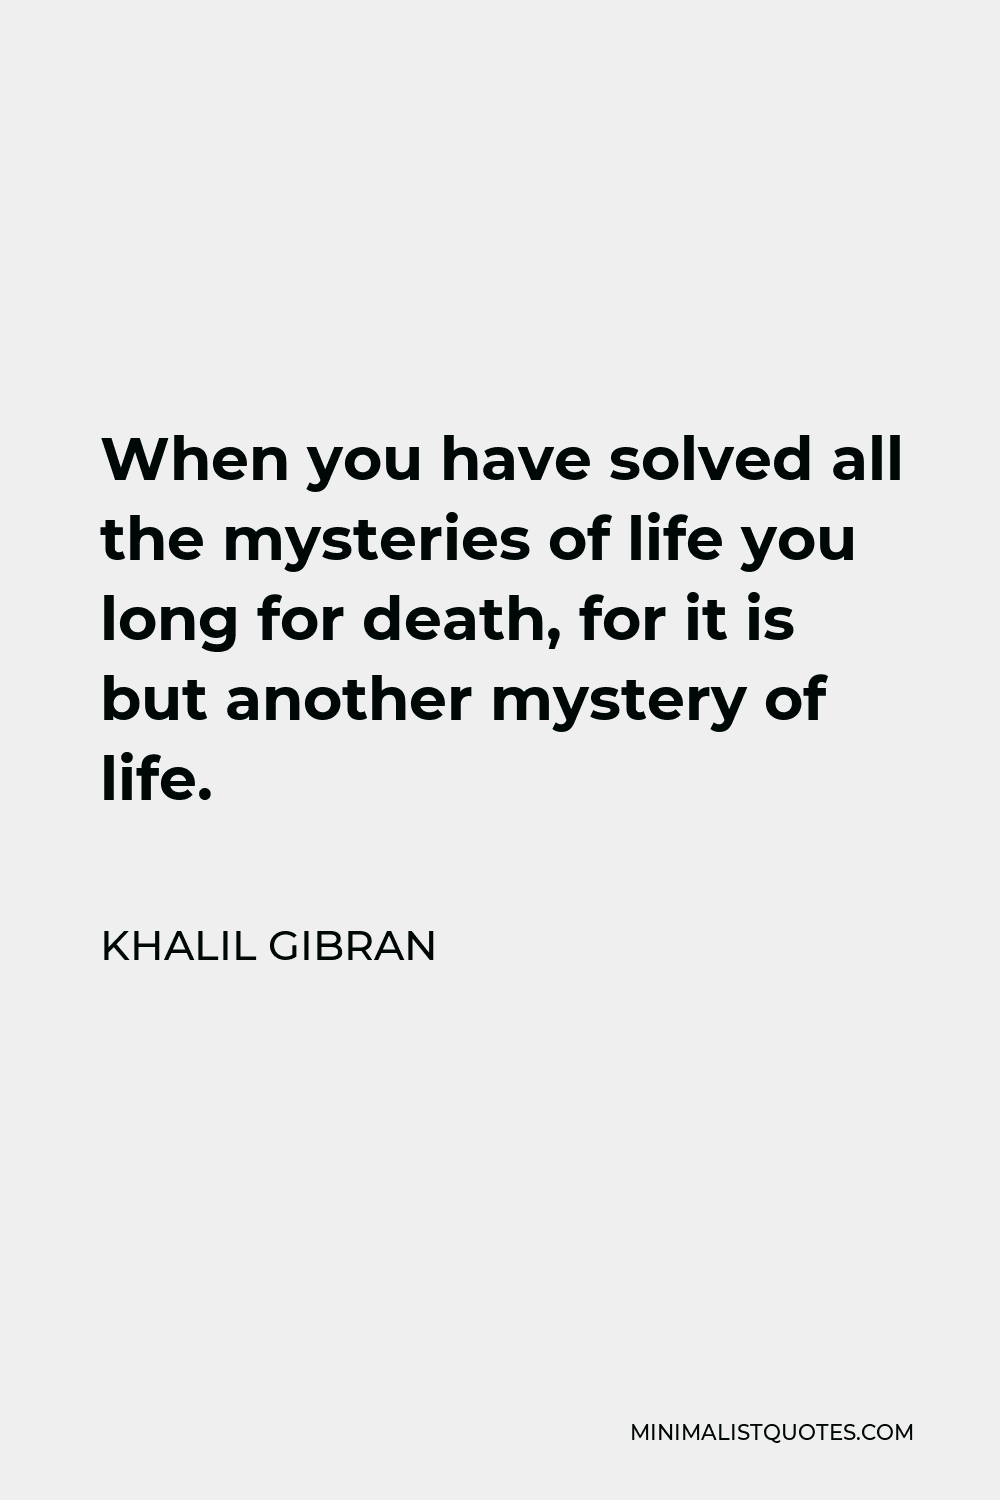 Khalil Gibran Quote - When you have solved all the mysteries of life you long for death, for it is but another mystery of life.